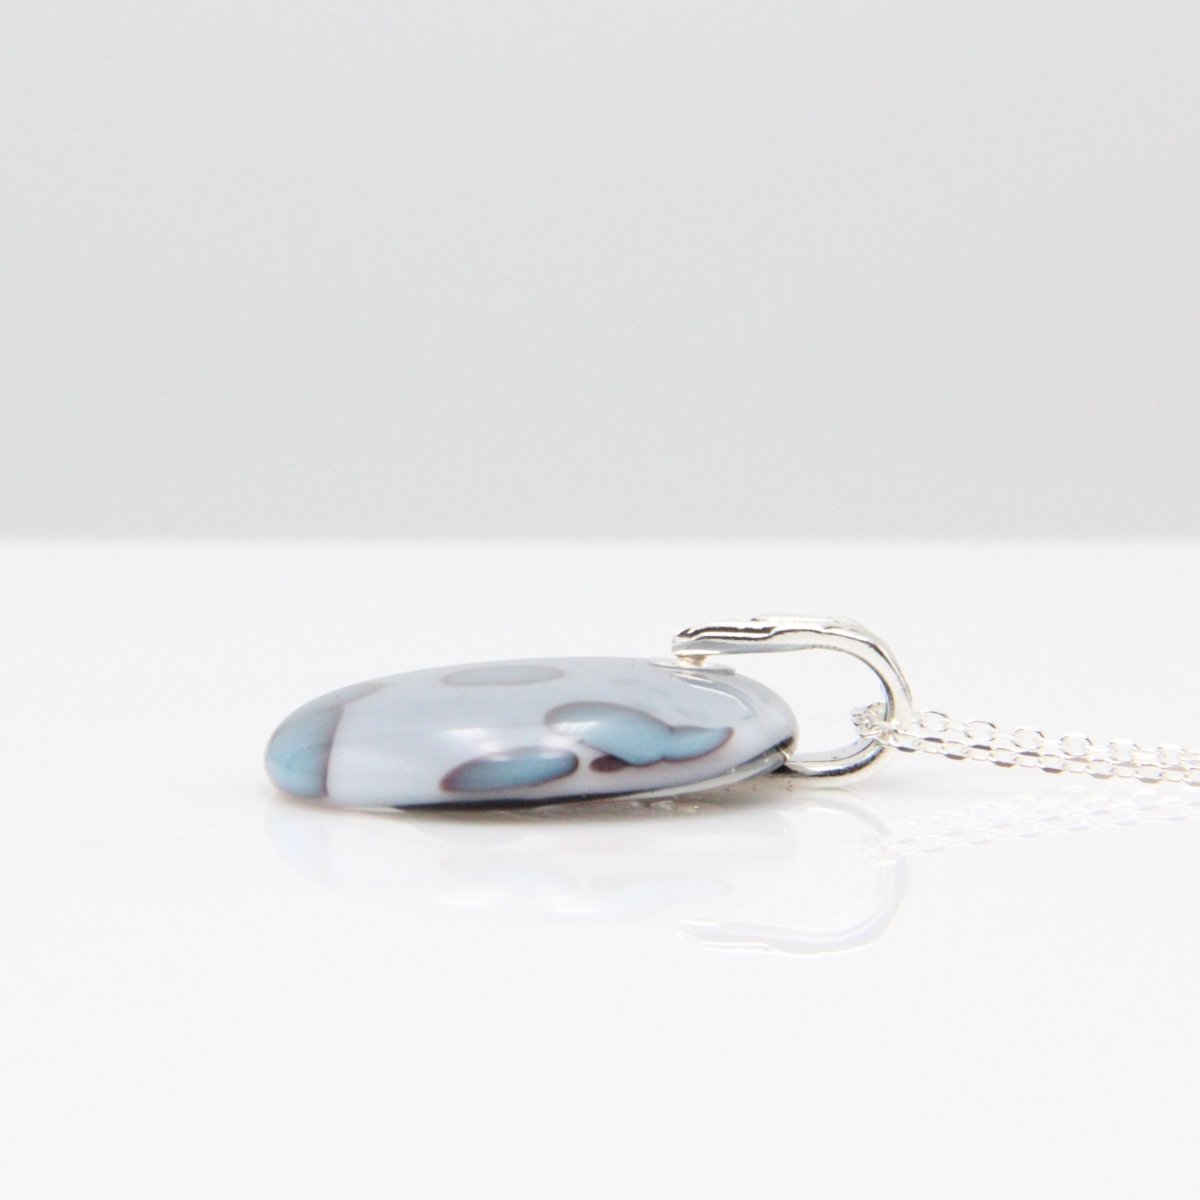 Handmade Gray and Turquoise Blue Glass Pendant on a Silver Chain